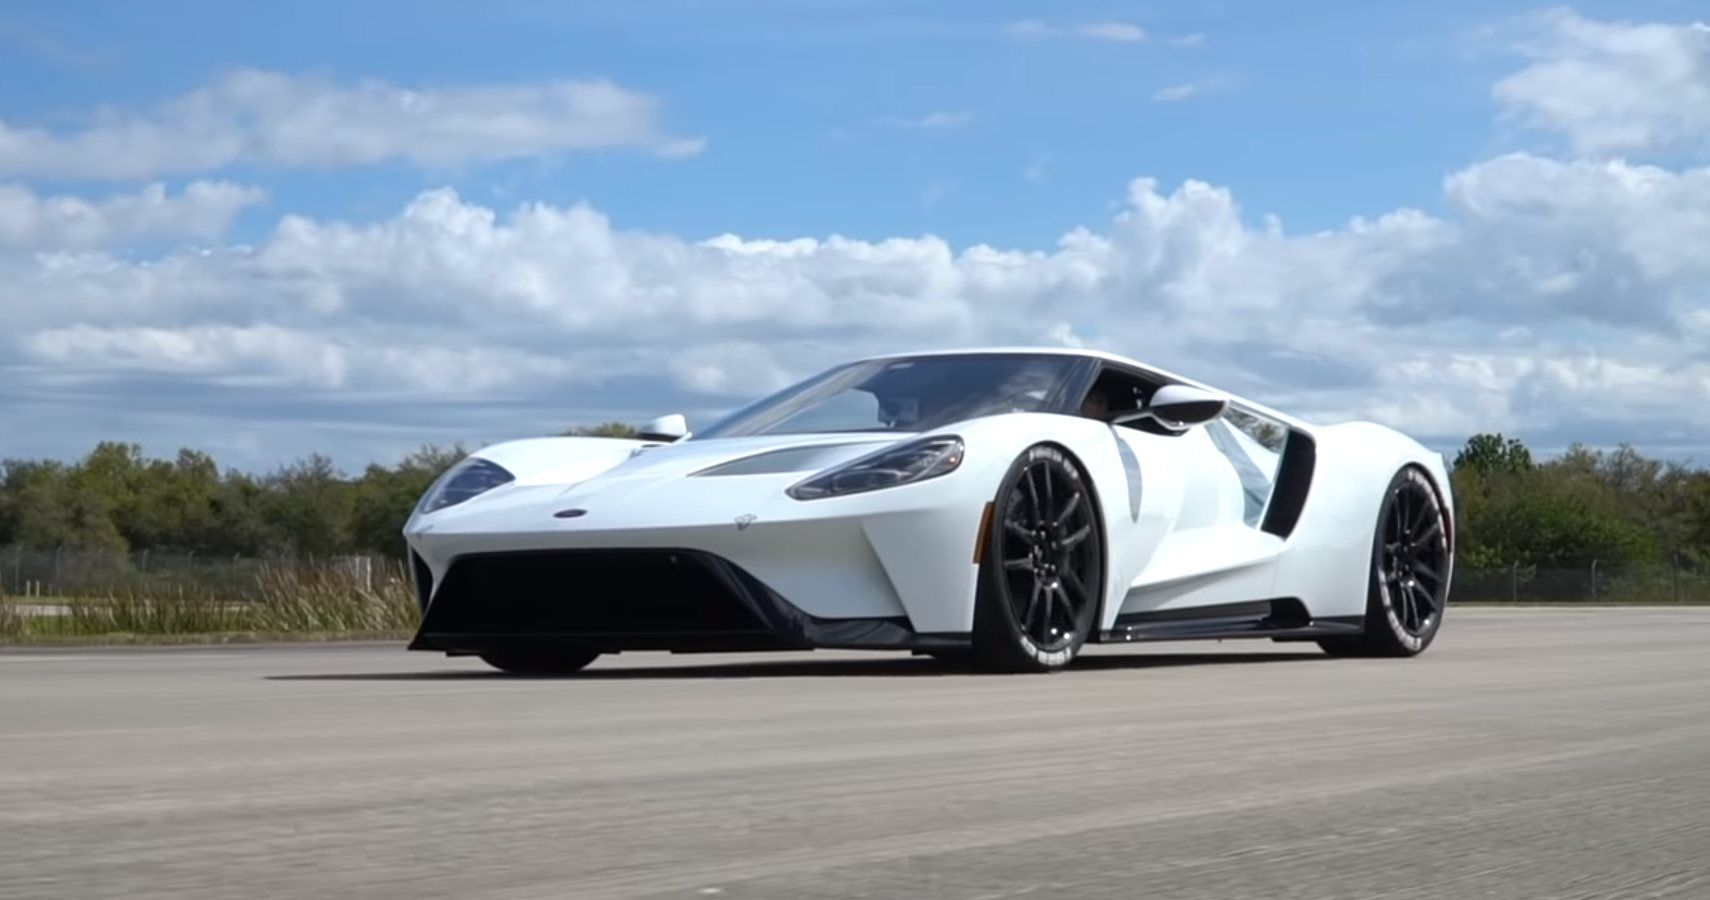 Ford GT Can't Quite Make Top Speed Of 216 MPH In Latest Test Video